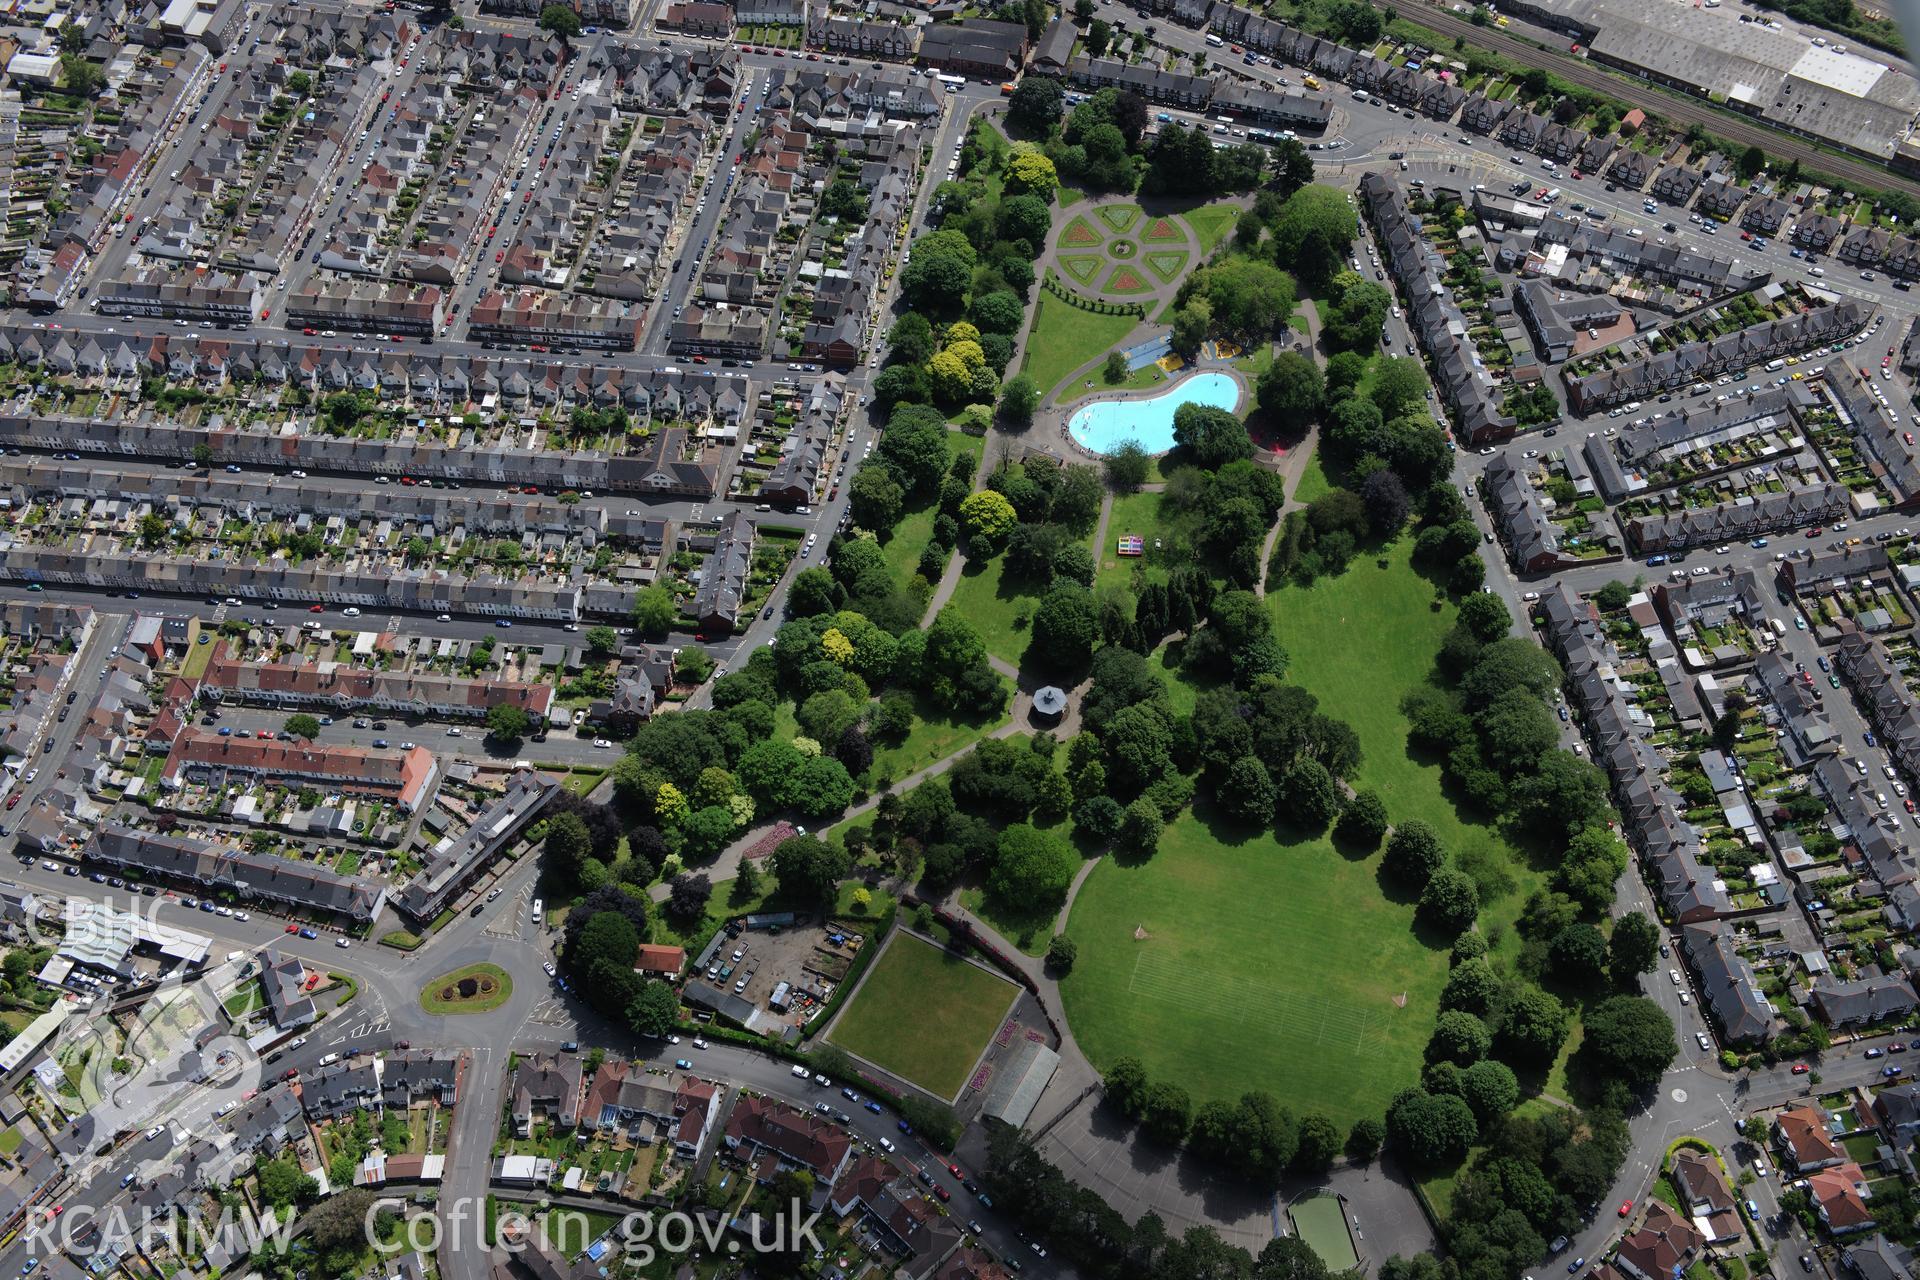 Victoria Park grounds and fountain canopy, Cardiff. Oblique aerial photograph taken during the Royal Commission's programme of archaeological aerial reconnaissance by Toby Driver on 29th June 2015.